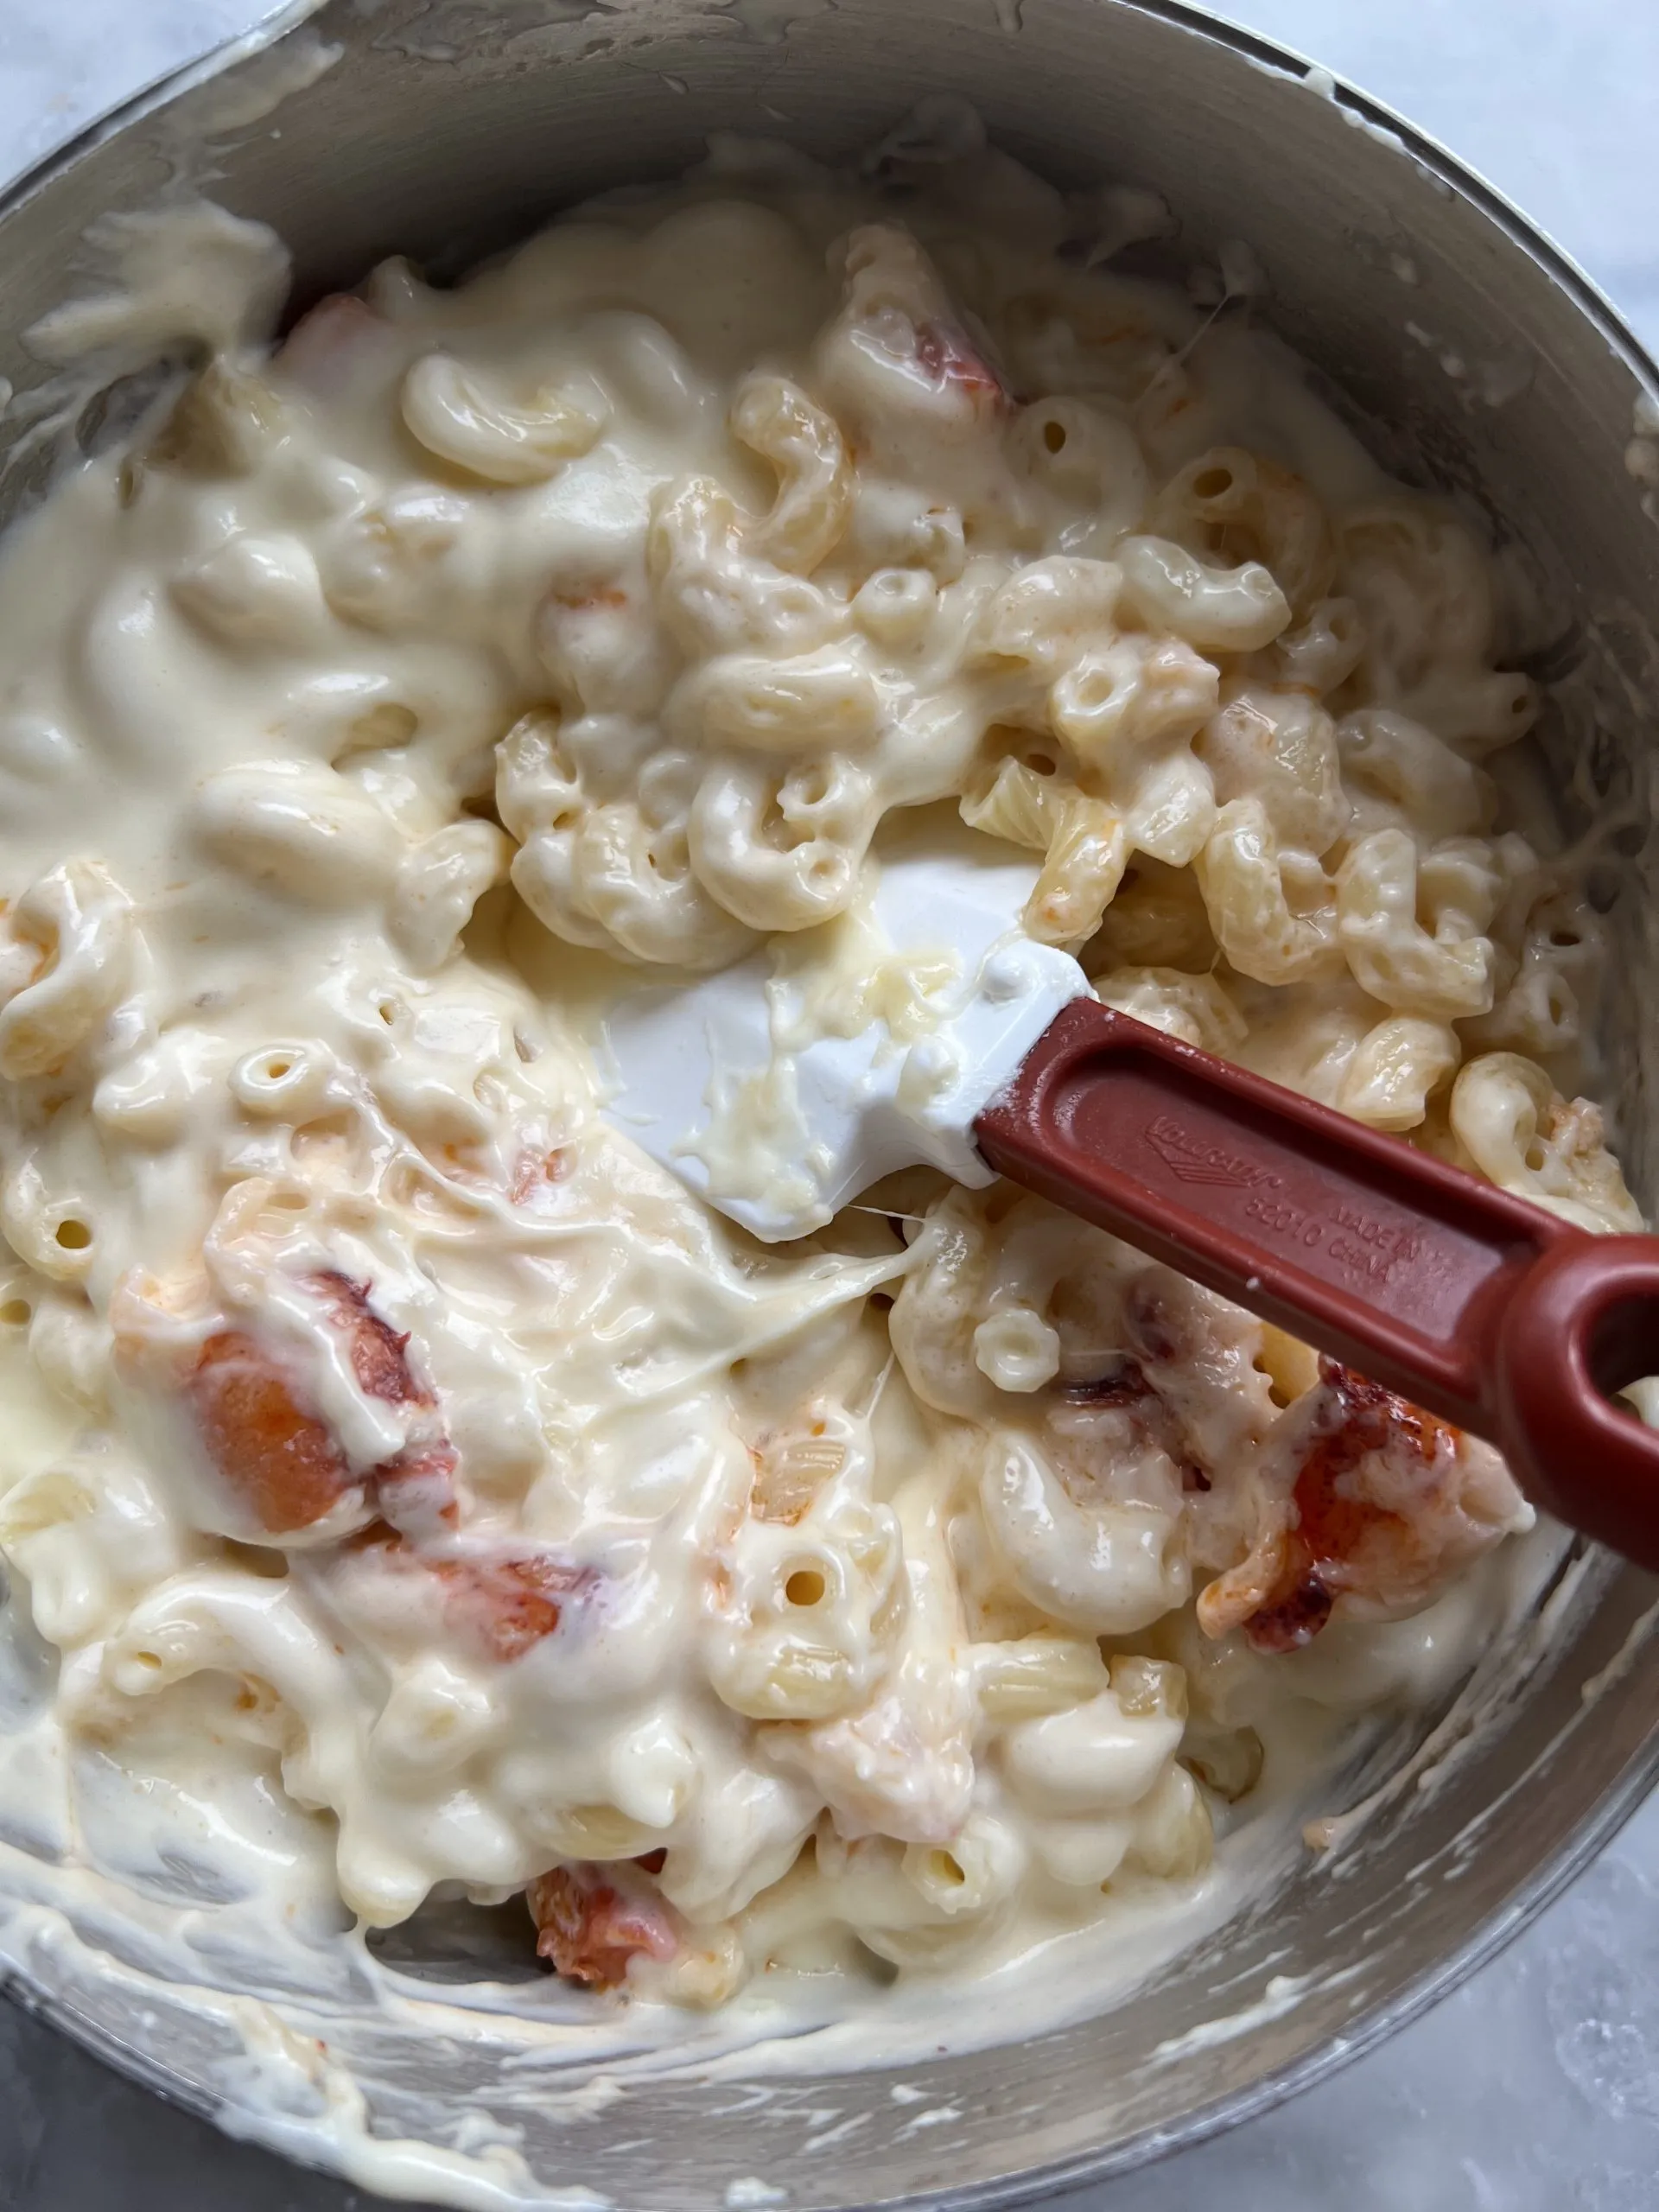 Mornay mixed with the lobster and pasta for Lobster Mac and cheese